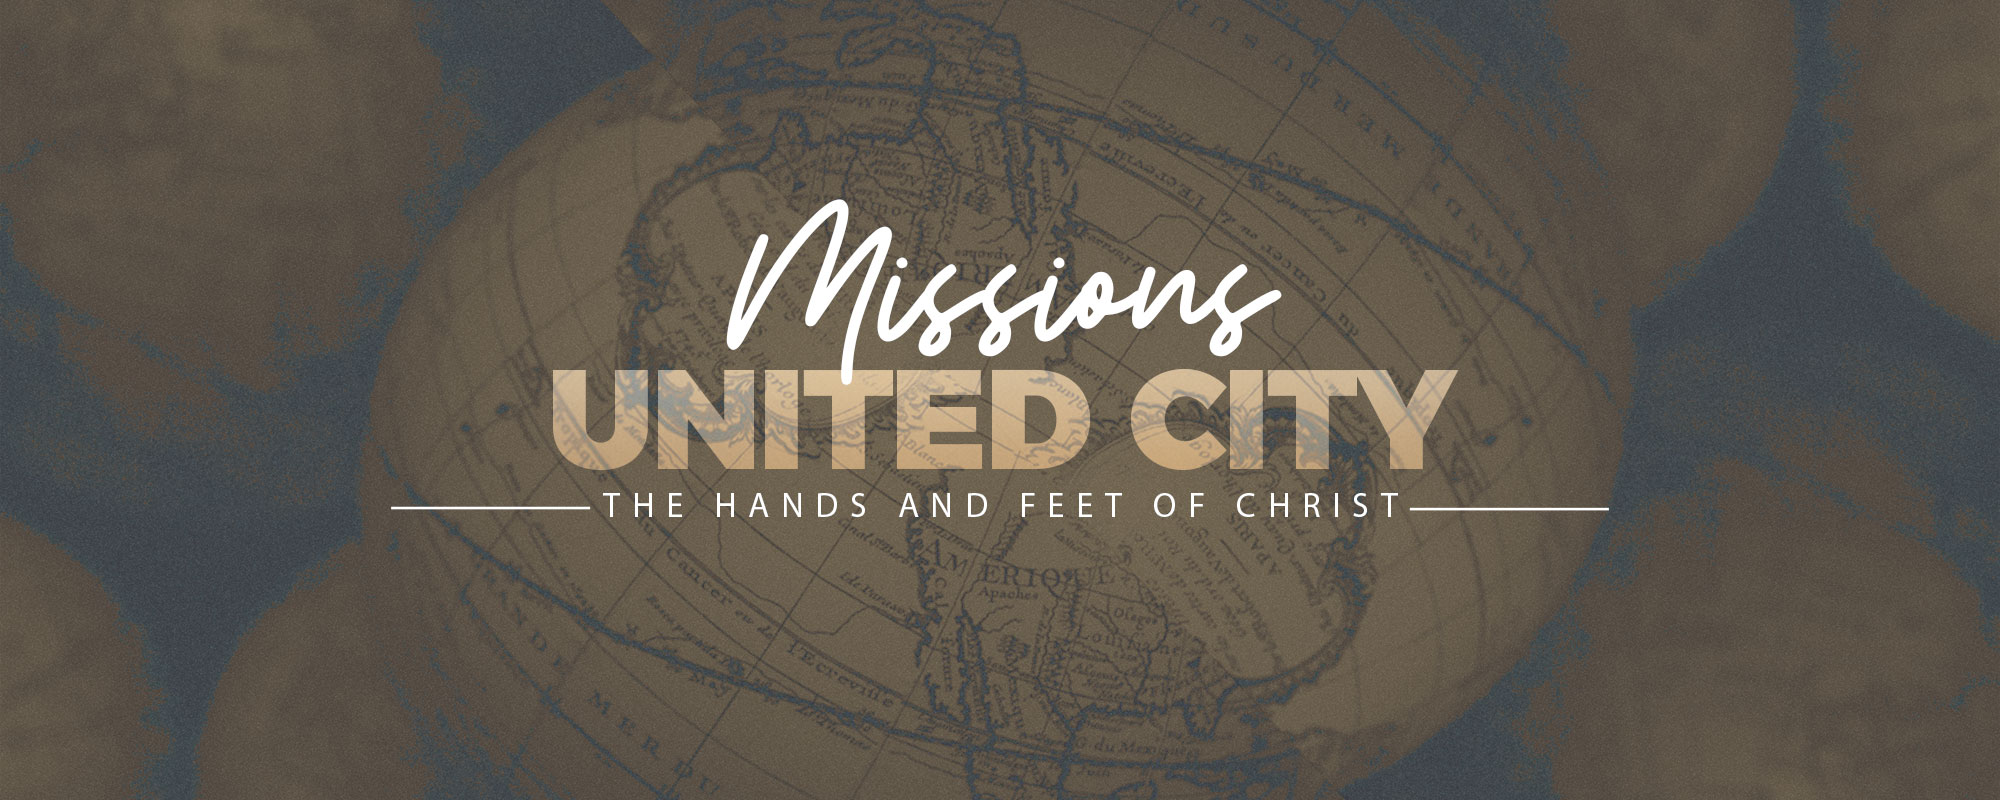 Missions at United City Church